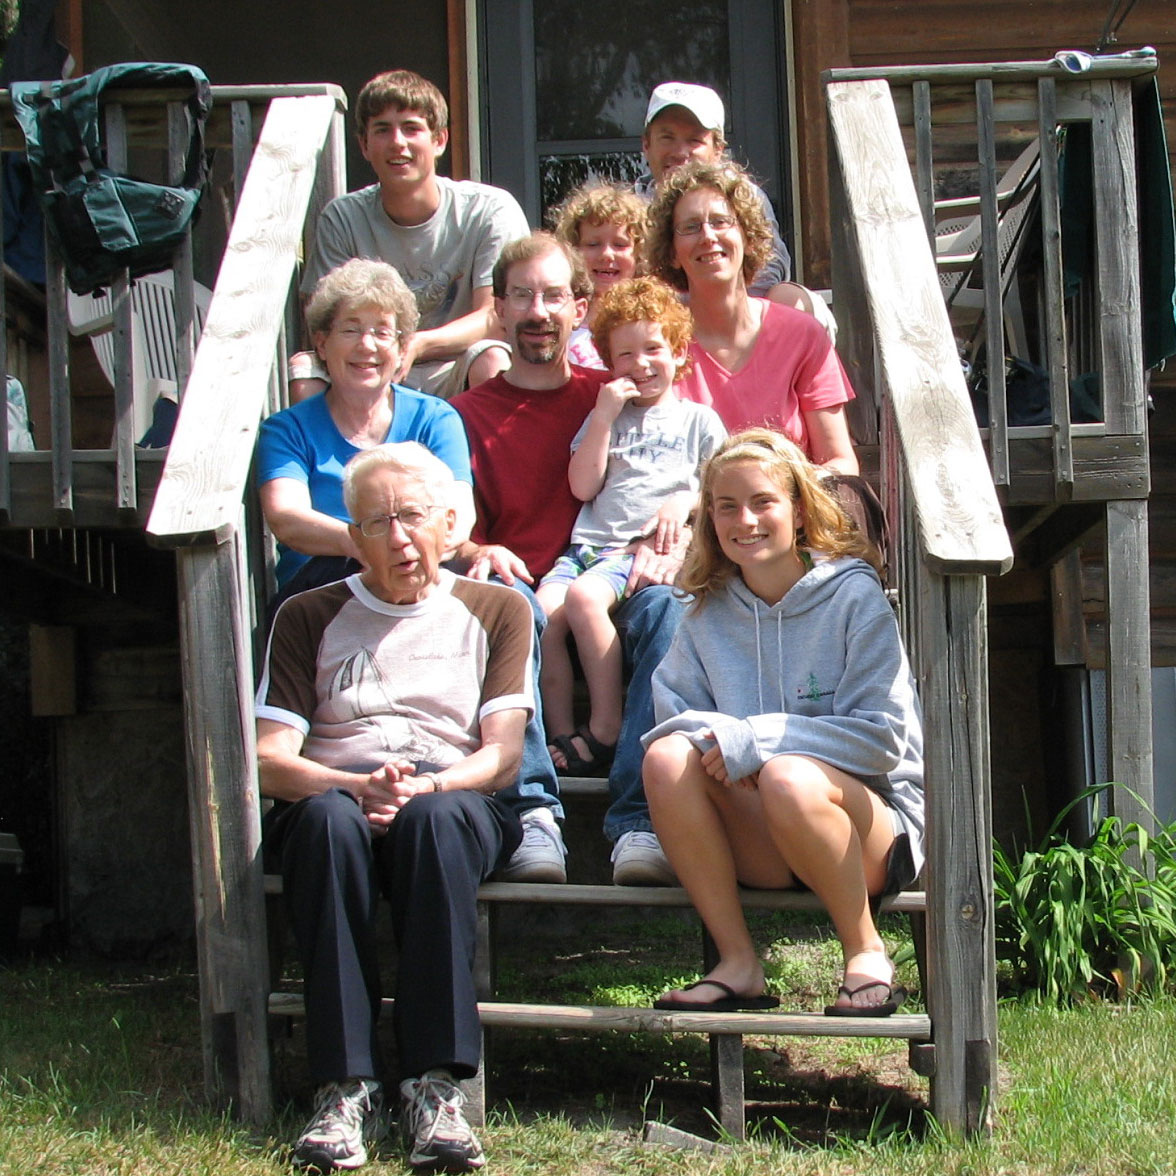 The family on the steps of a cabin